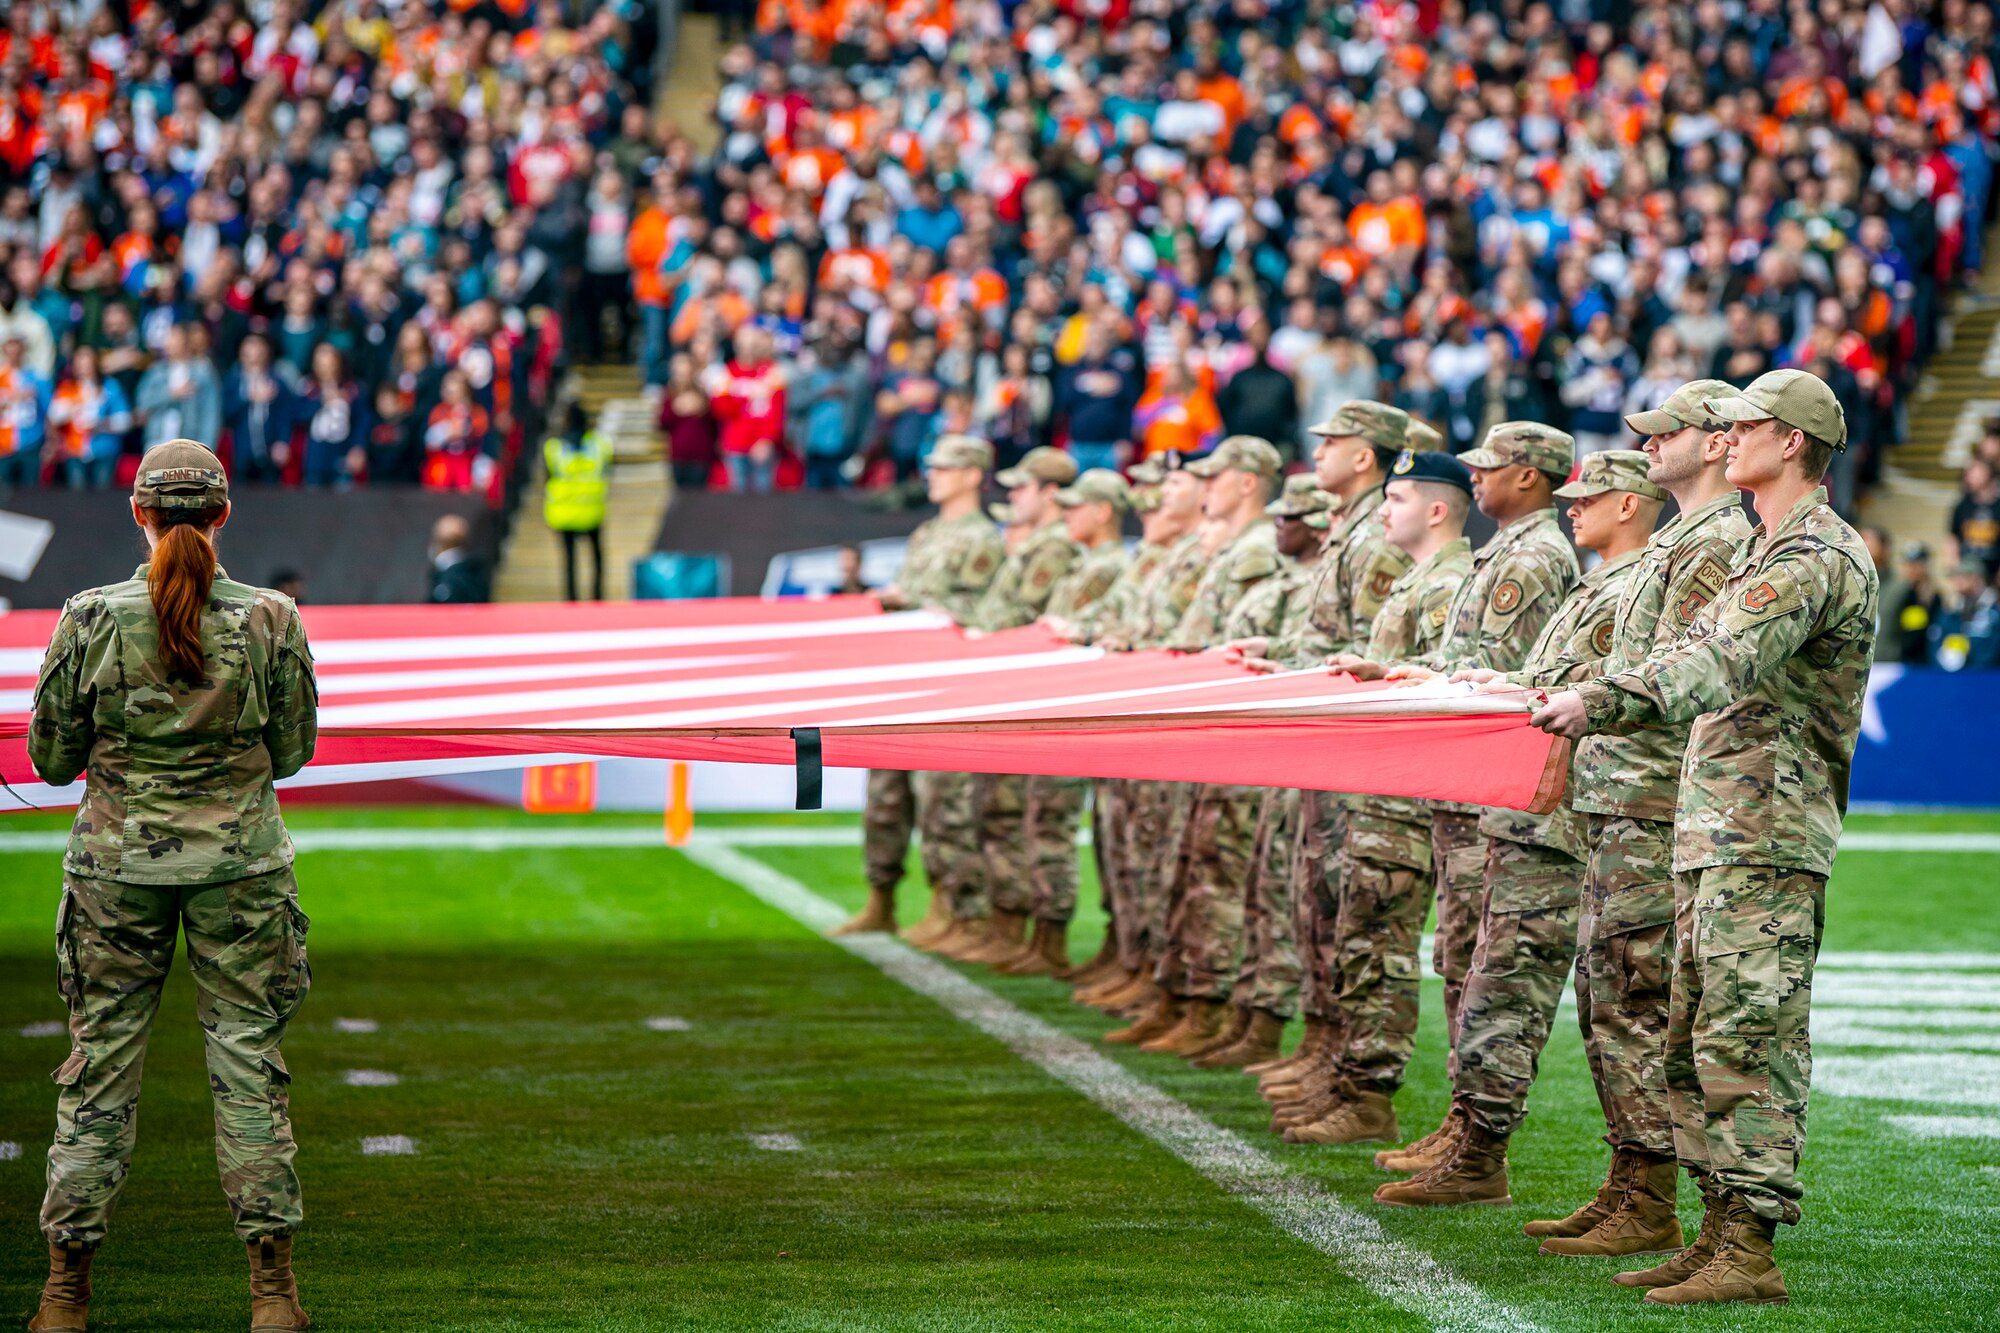 Airmen from the 501st Combat Support Wing hold an American flag during the national anthem at Wembley Stadium, in London, England, Oct. 30, 2022. Approximately 70 uniformed personnel represented the U.S. Air Force and nation by unveiling an American flag during the pre-game ceremonies of the Jacksonville Jaguars and Denver Broncos NFL game. (U.S. Air Force photo by Staff Sgt. Eugene Oliver)